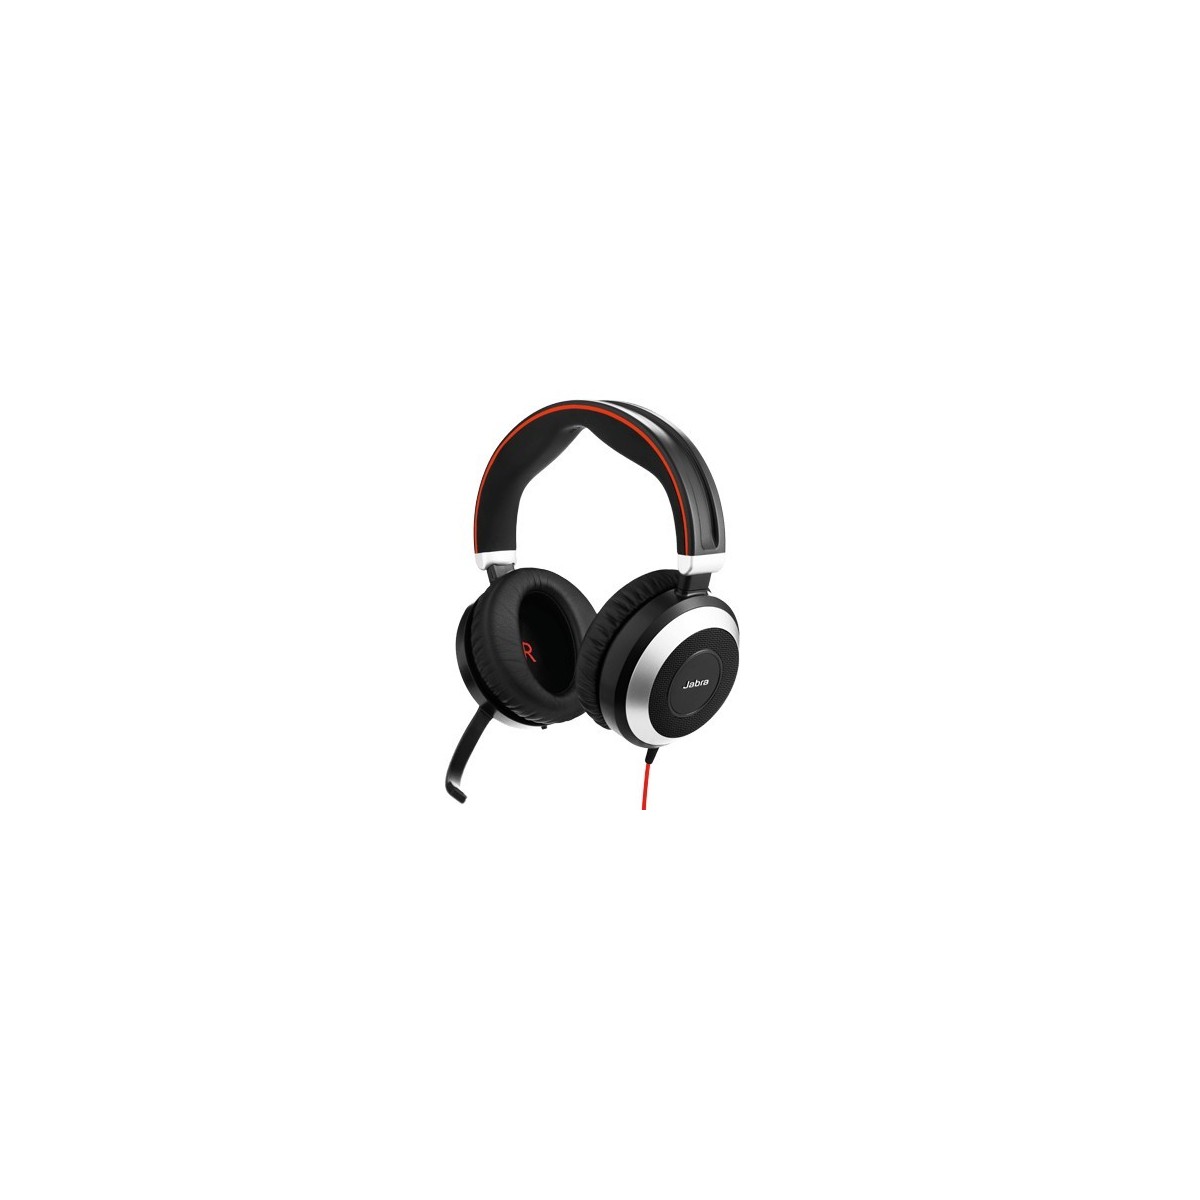 Jabra Evolve 80 Stereo - Headset - Head-band - Office/Call center - Black - Red - Silver - Binaural - Red